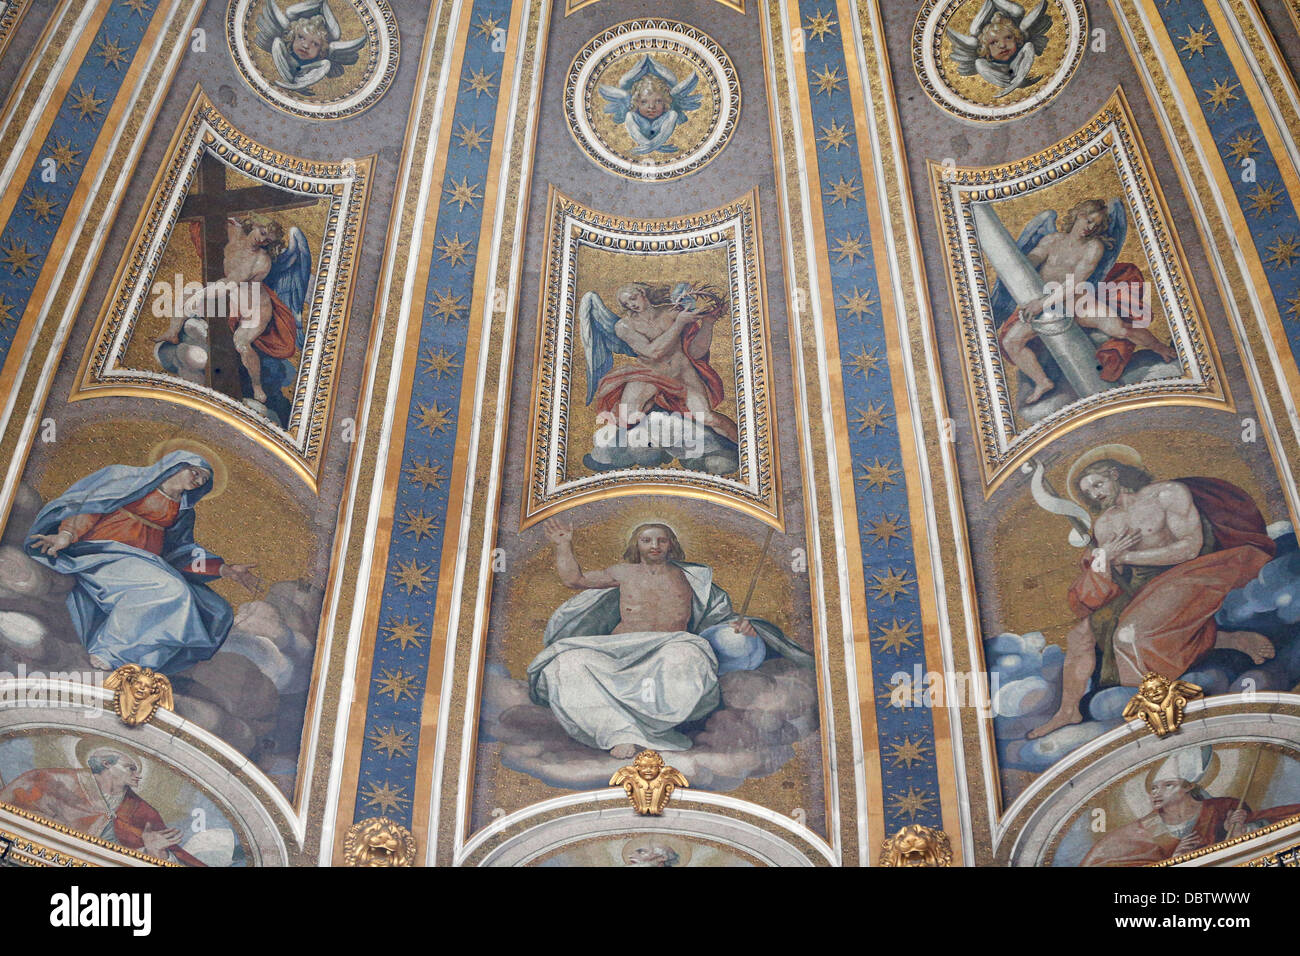 Detail of dome and frescoes in St. Peter's Basilica, Vatican, Rome, Lazio, Italy, Europe Stock Photo